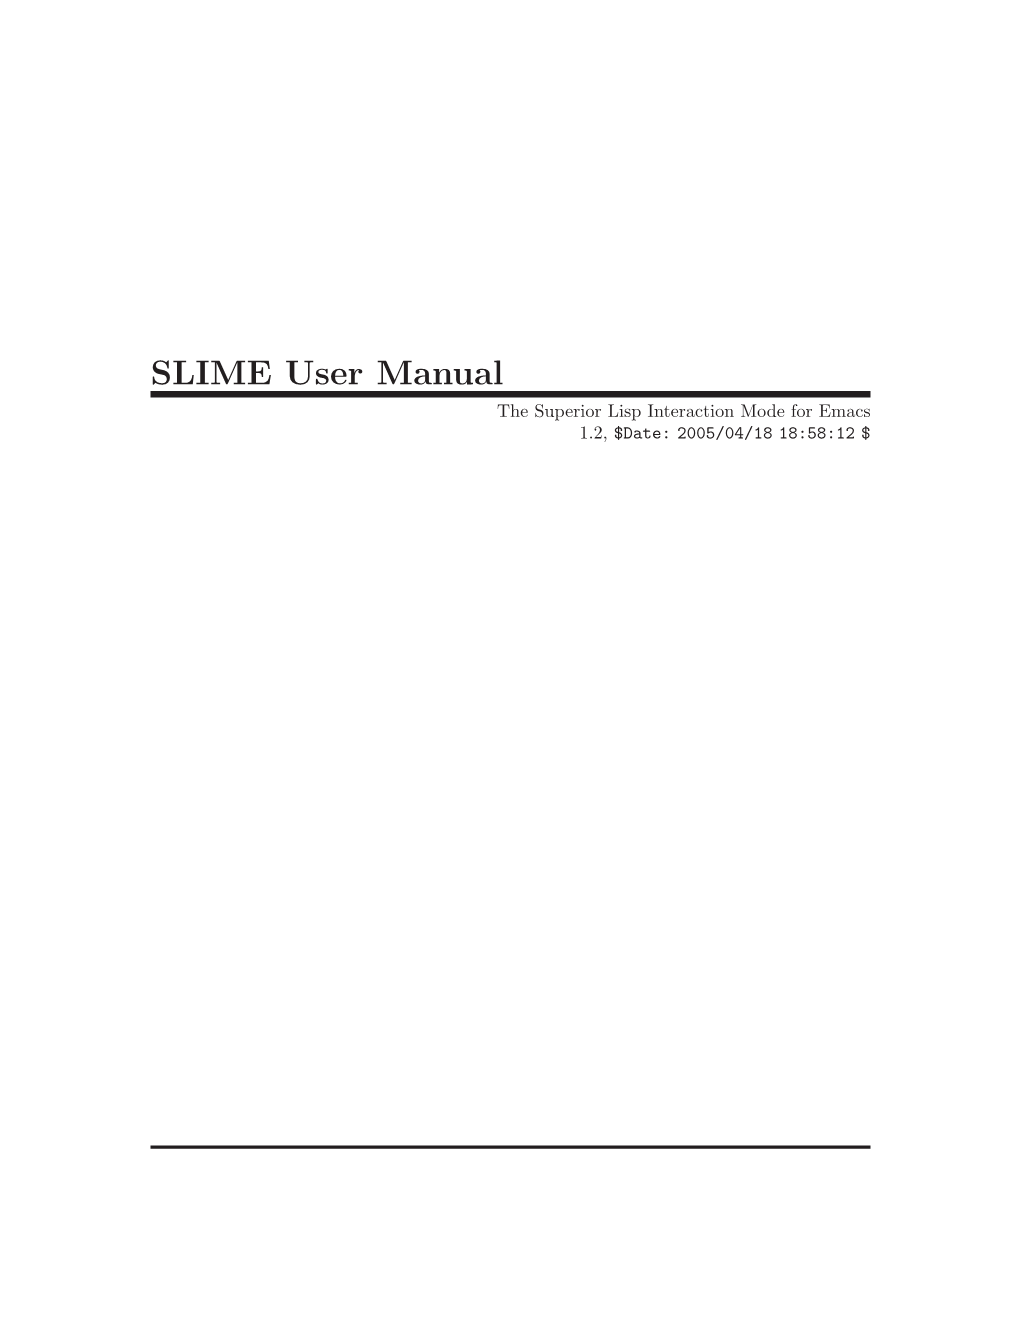 SLIME User Manual the Superior Lisp Interaction Mode for Emacs 1.2, $Date: 2005/04/18 18:58:12 $ I